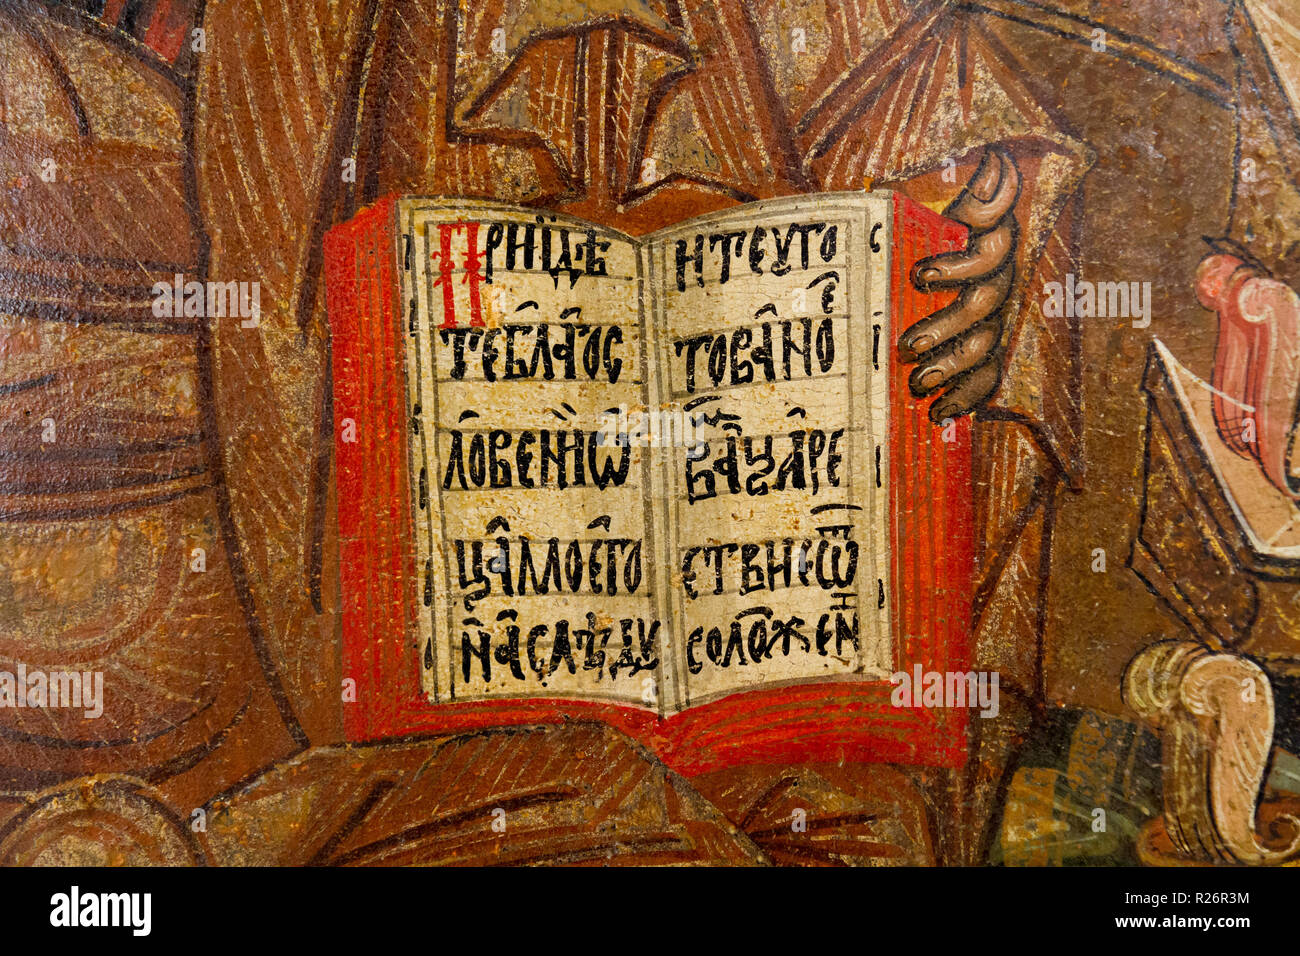 An open Bible with a quote in Greek from the Scriptures. Jesus Christ is holding th book. Stock Photo